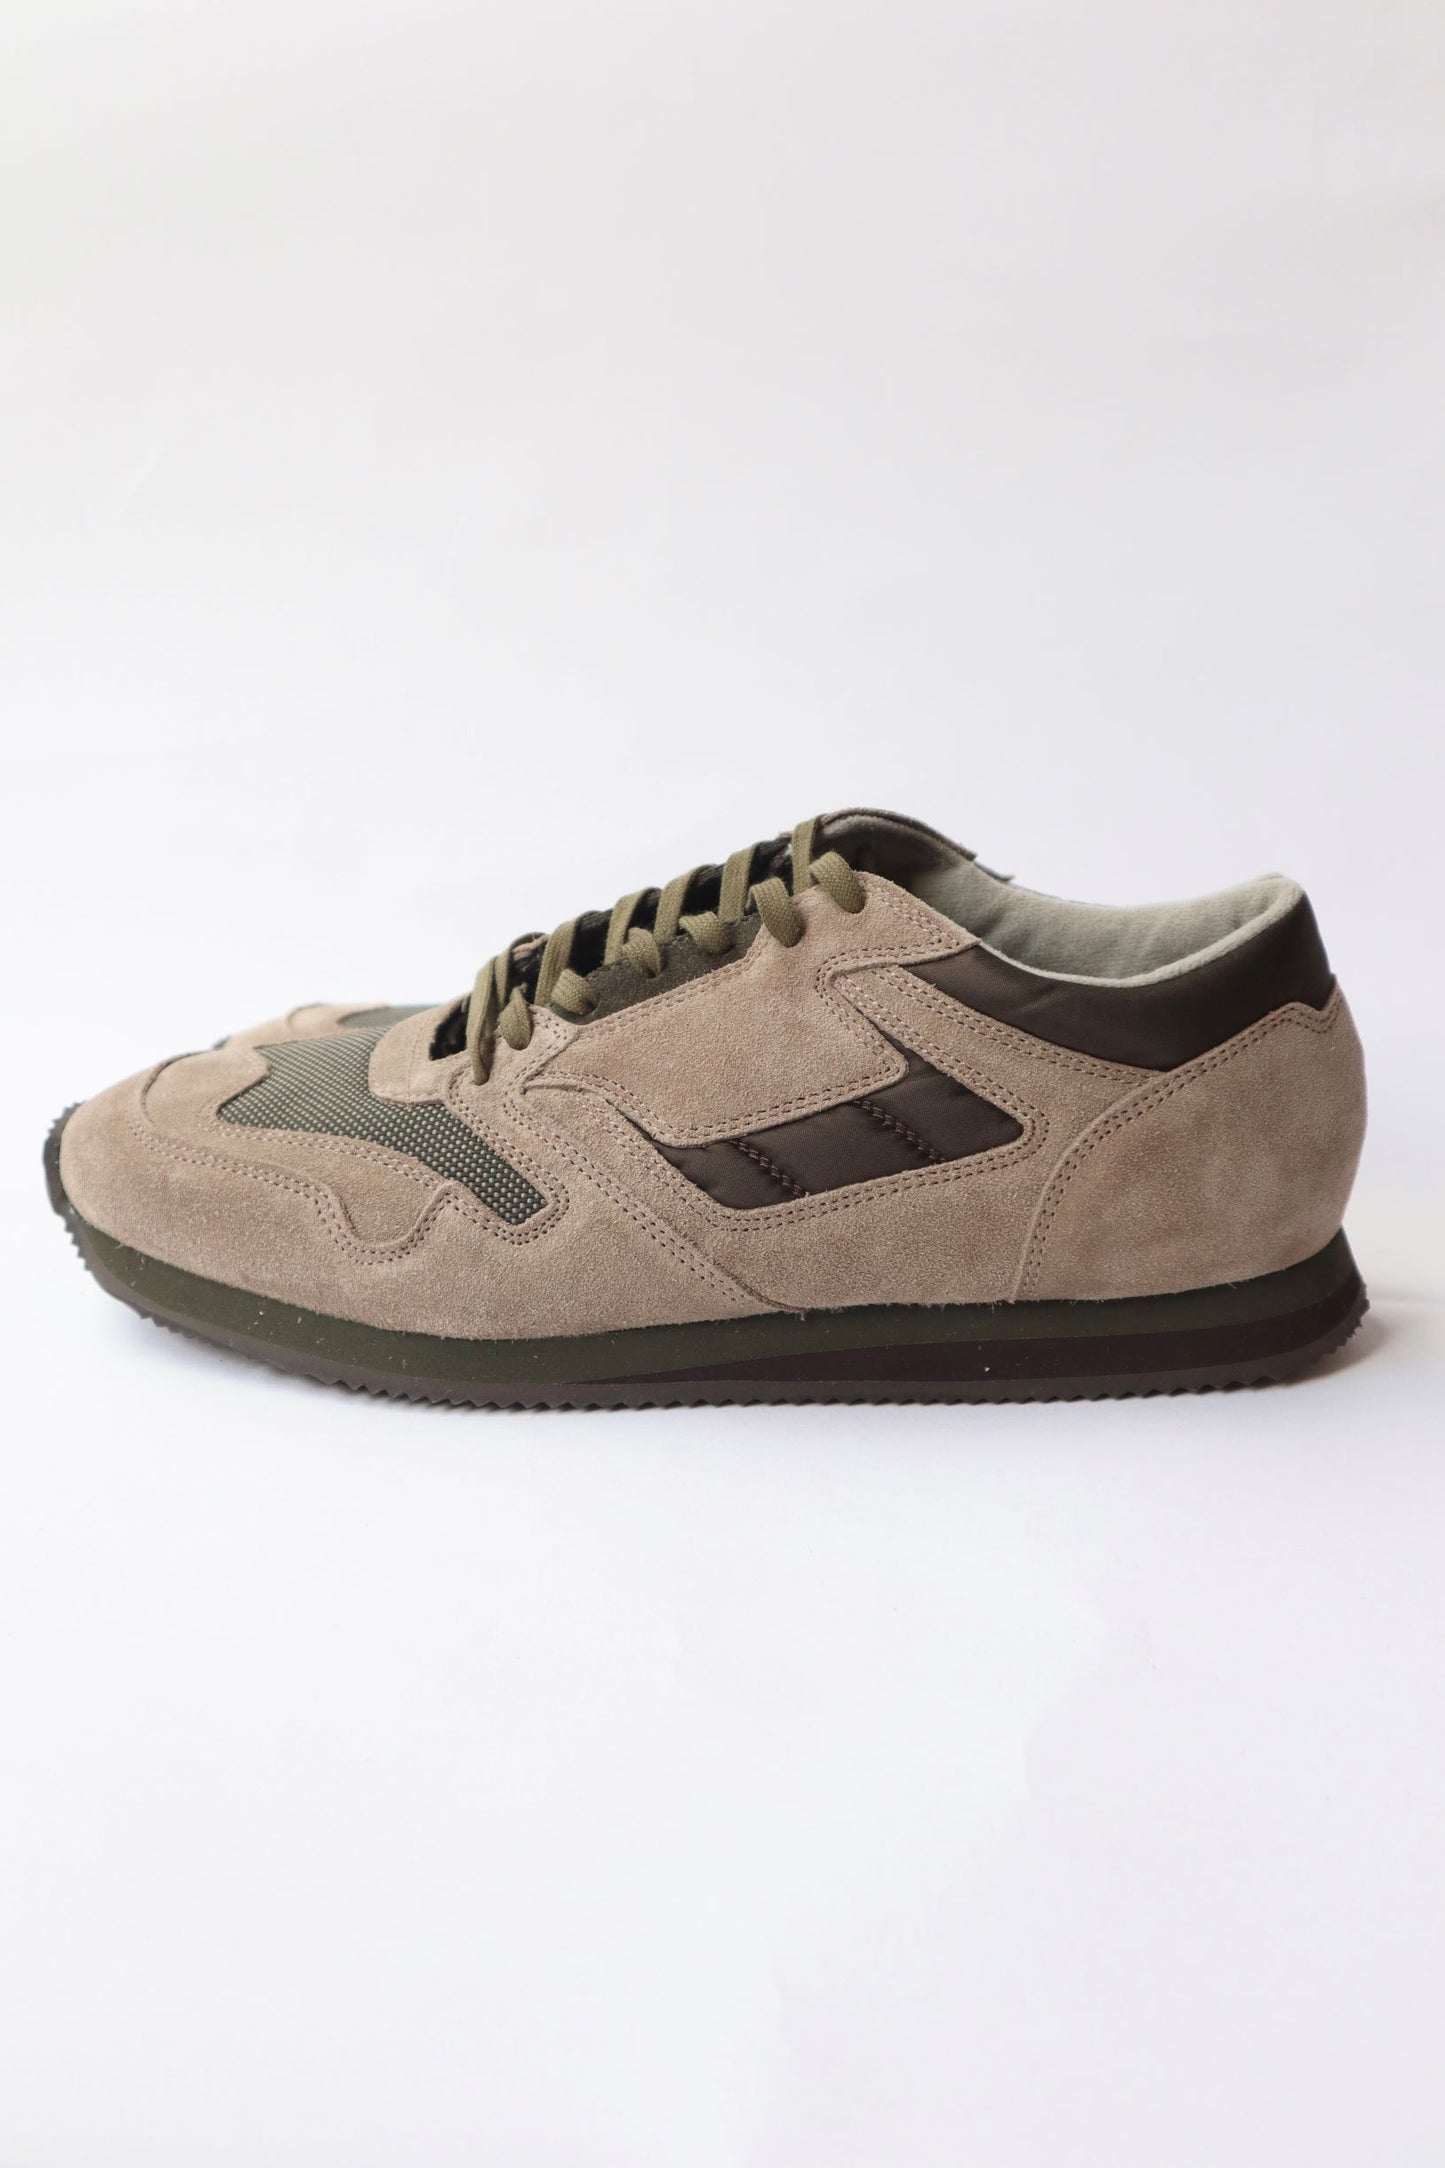 SUNNYSIDERS_REPRODUCTION OF FOUND_1800FS BRITISH MIRITARY TRAINER Beige / Olive_Trainer